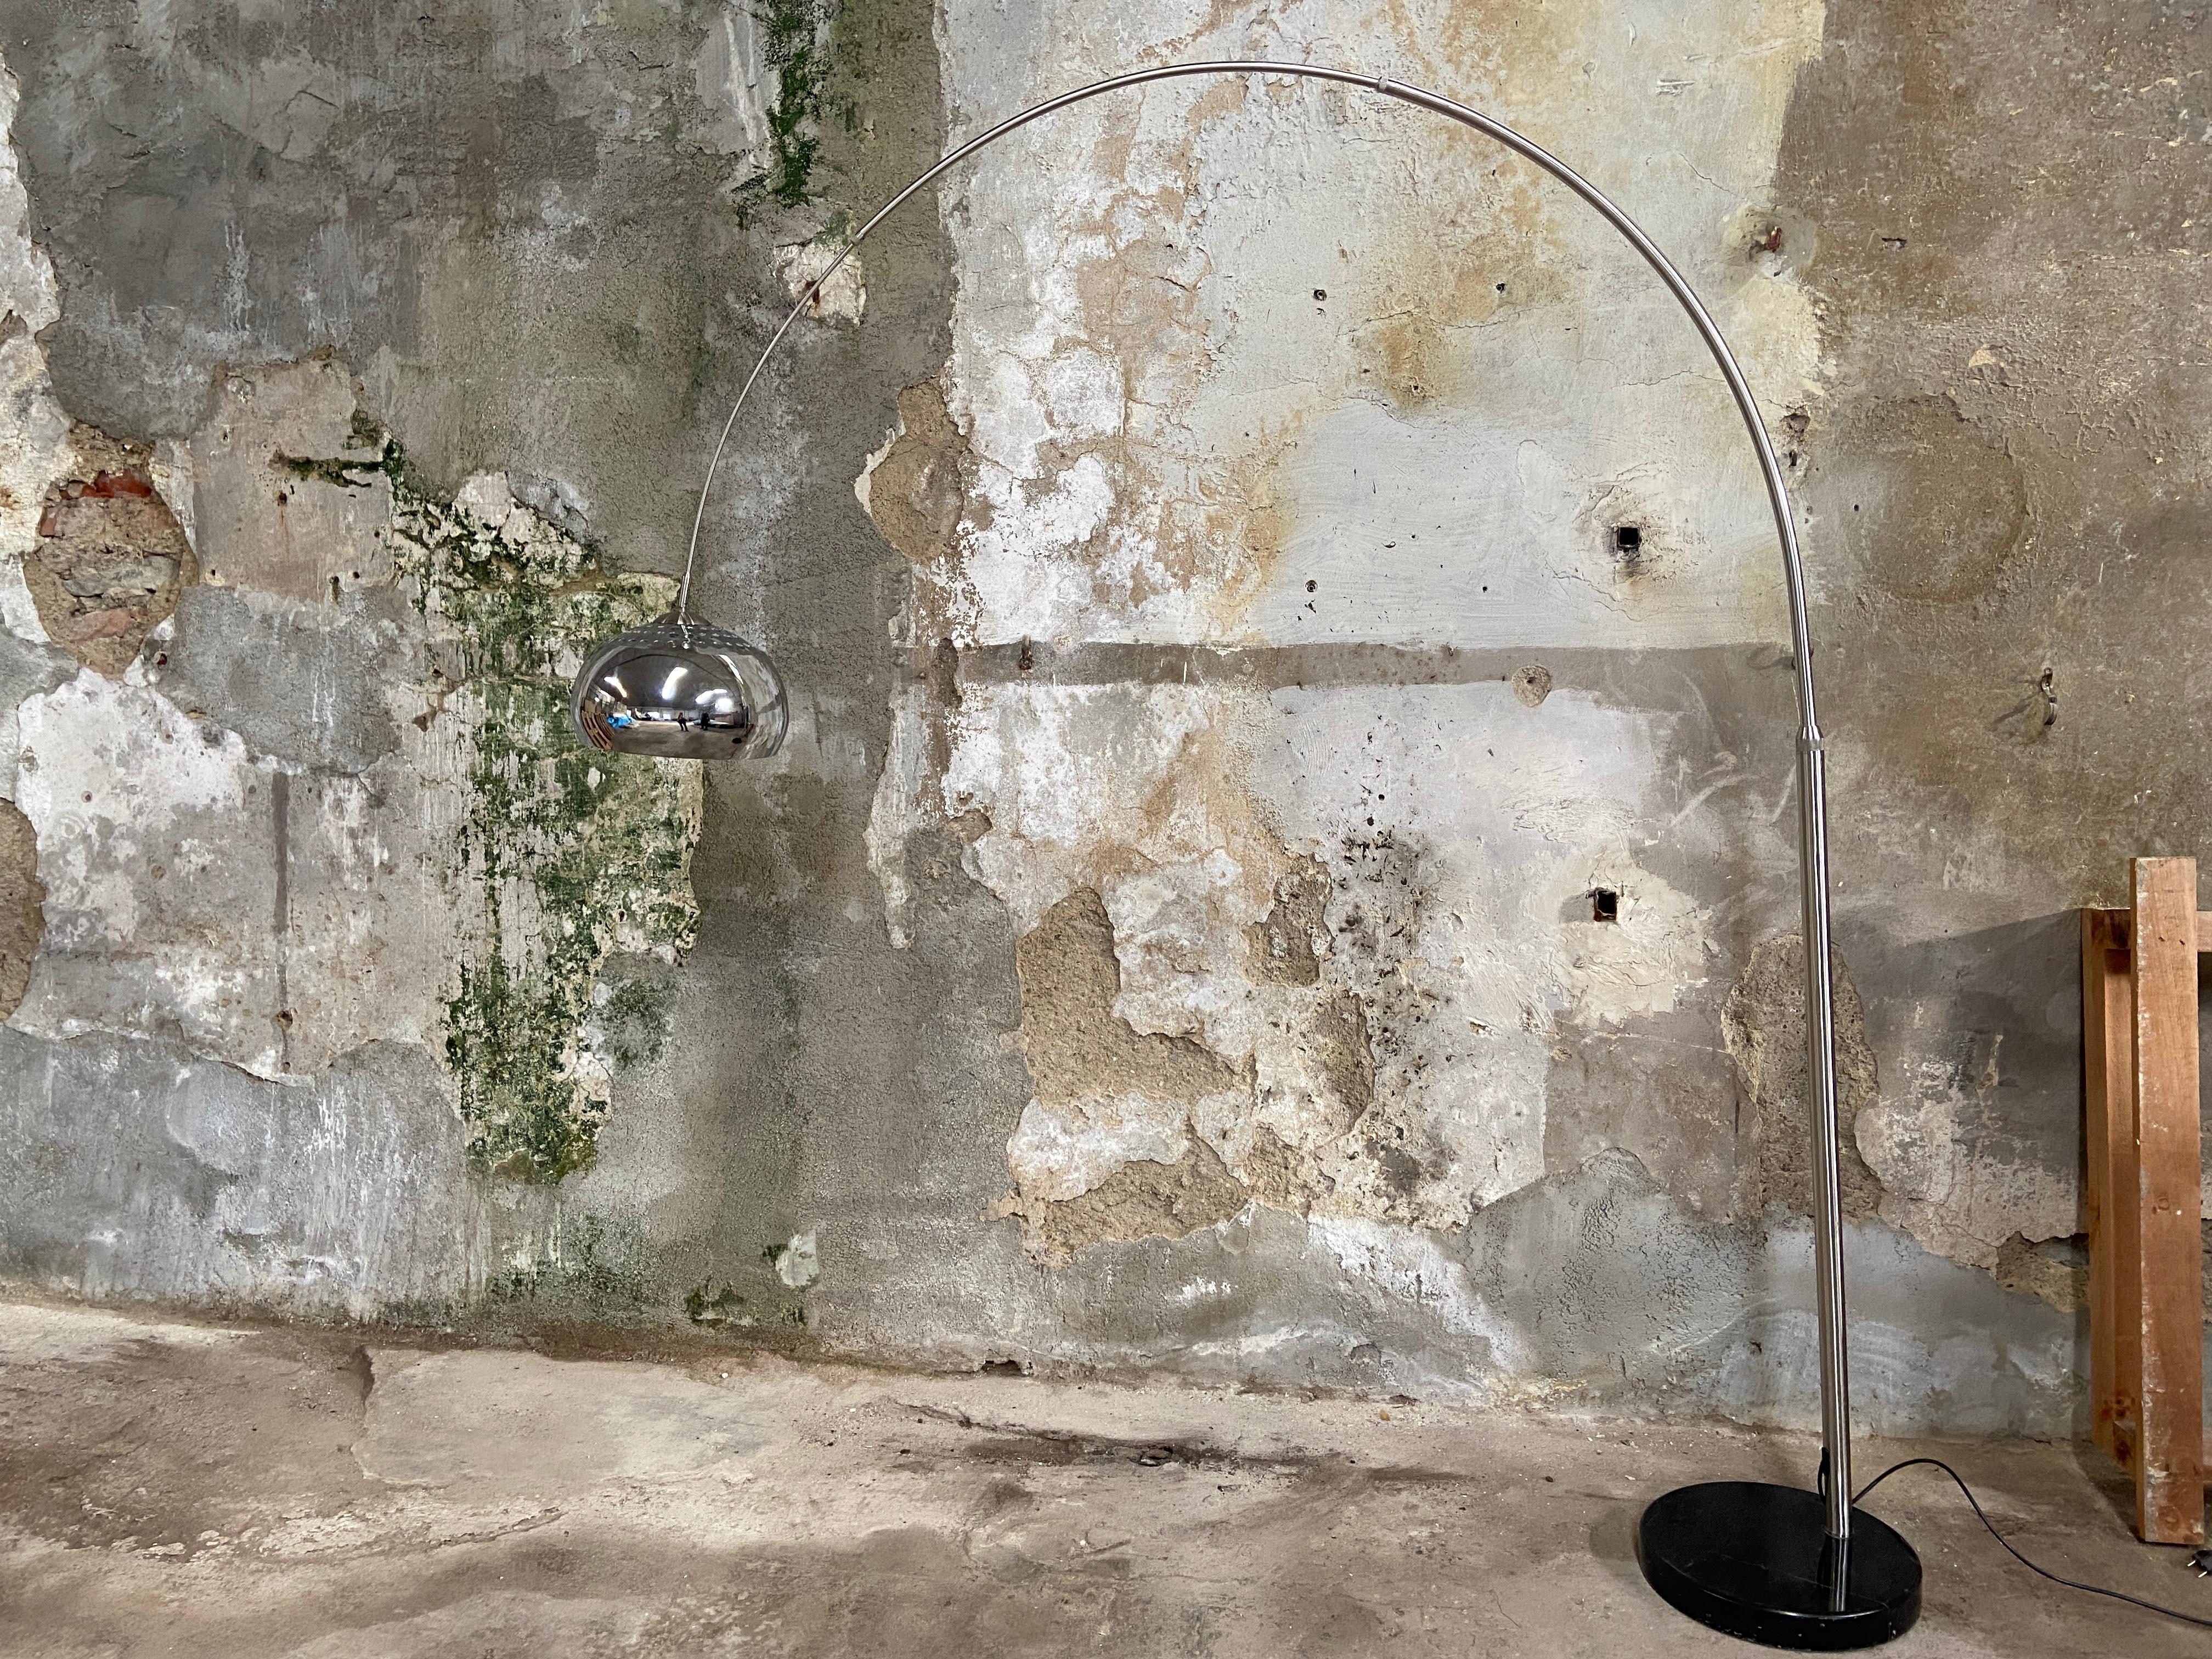 Mid-Century Modern Italian stainless steel arc retractable floor lamp with Belgian black marble base, 1970s
This lamp comes with European electrification.